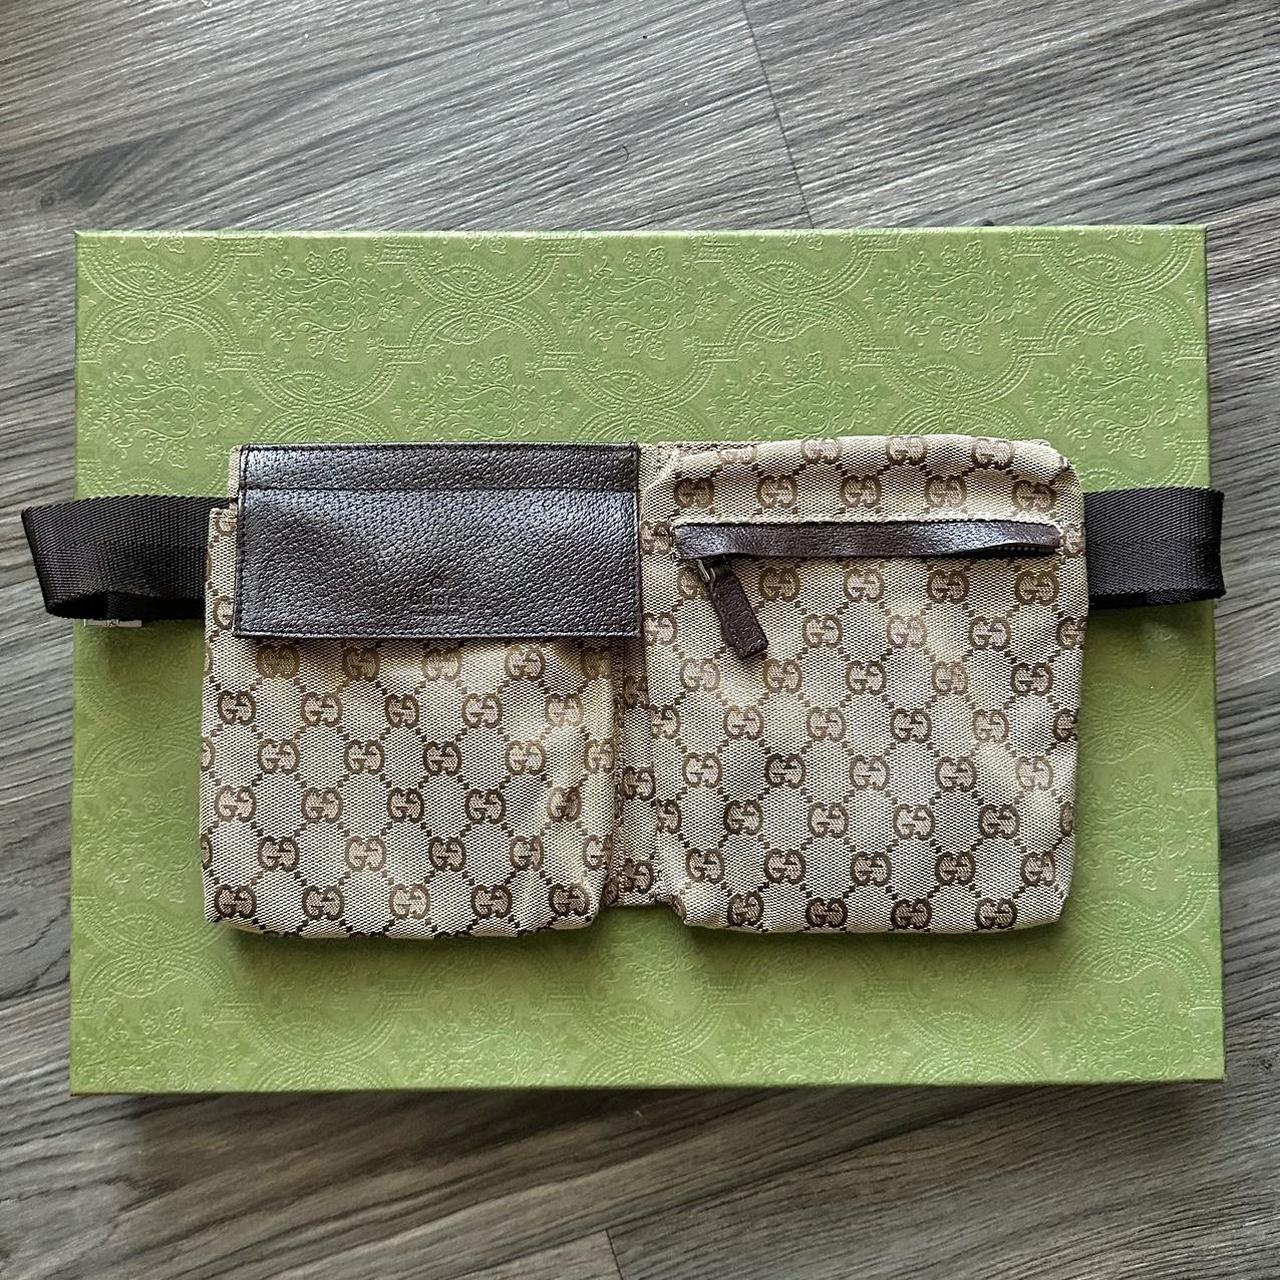 Authenticated Used Gucci Waist Pouch Body Bag GUCCI Backpack Belt LA Angel  536842 9Y9LX 9586 